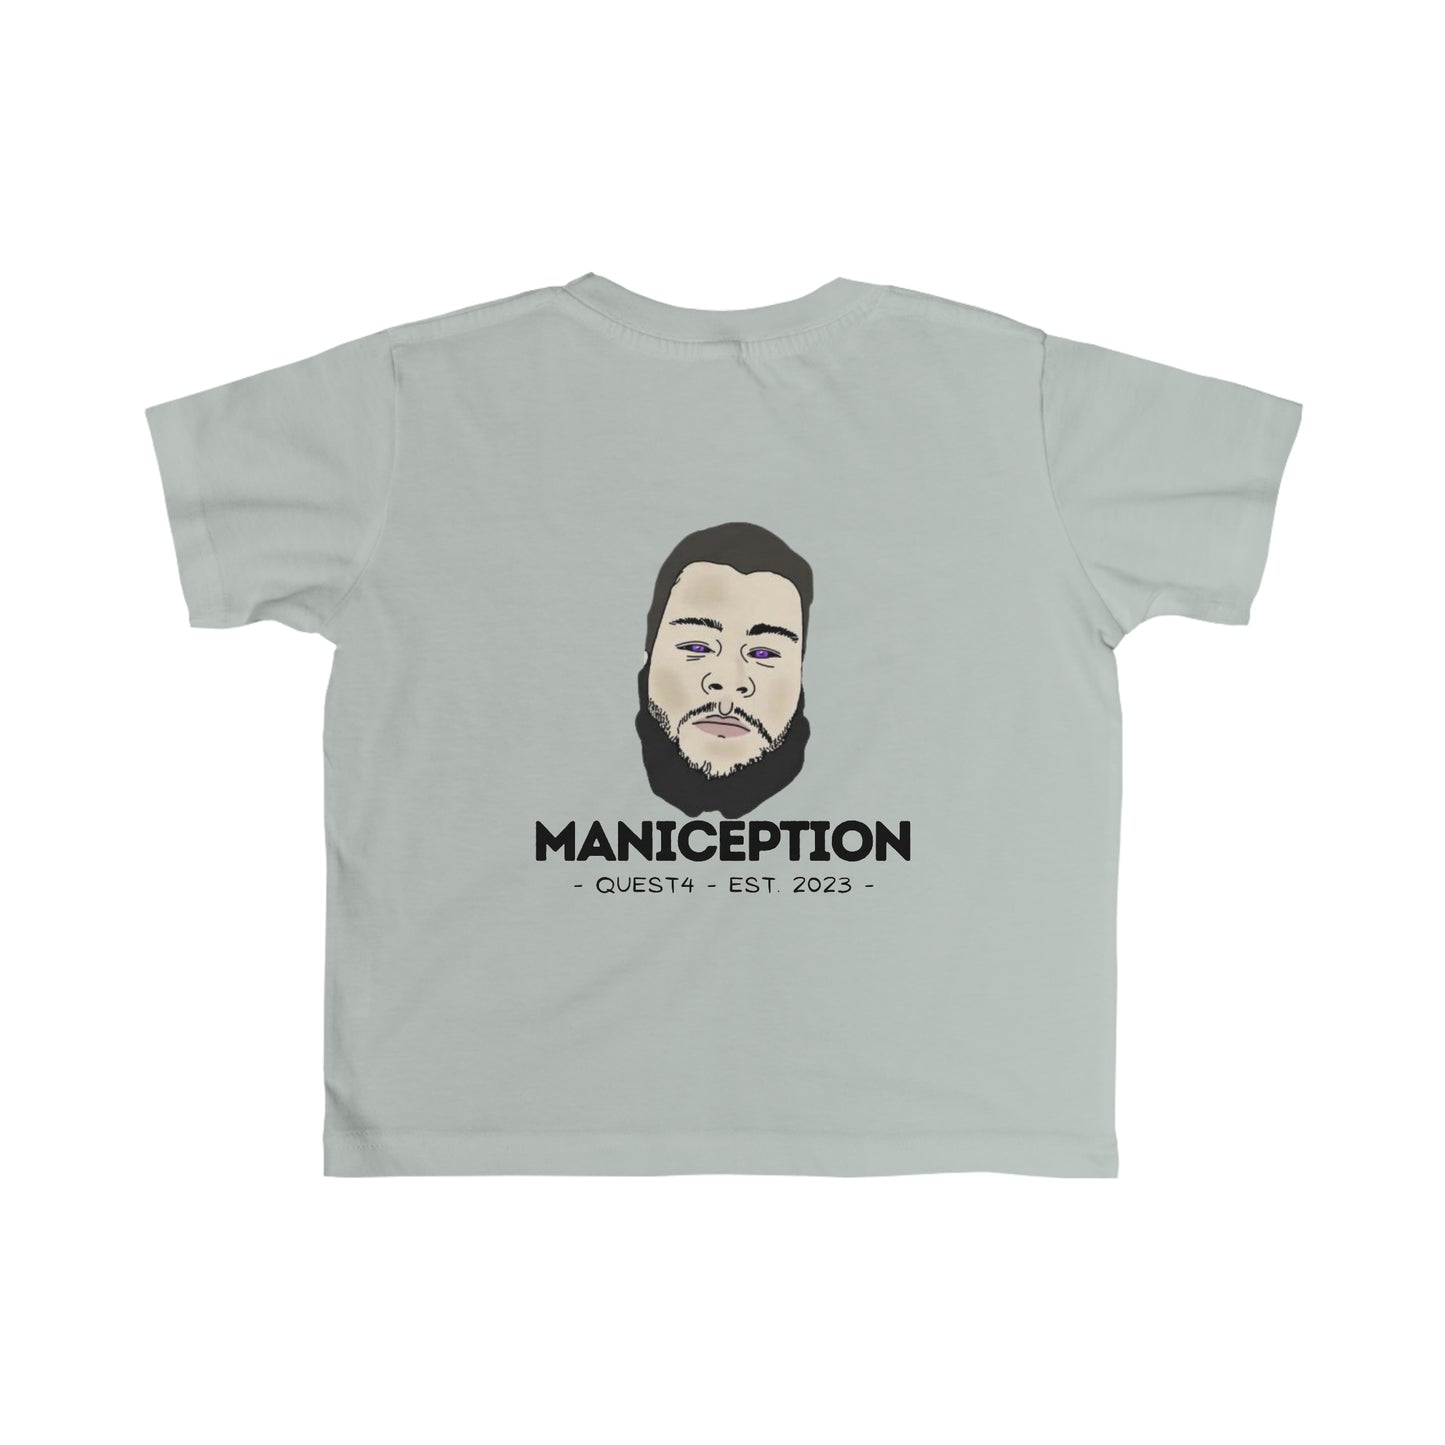 MANICEPTION Toddler's Fine Jersey Tee